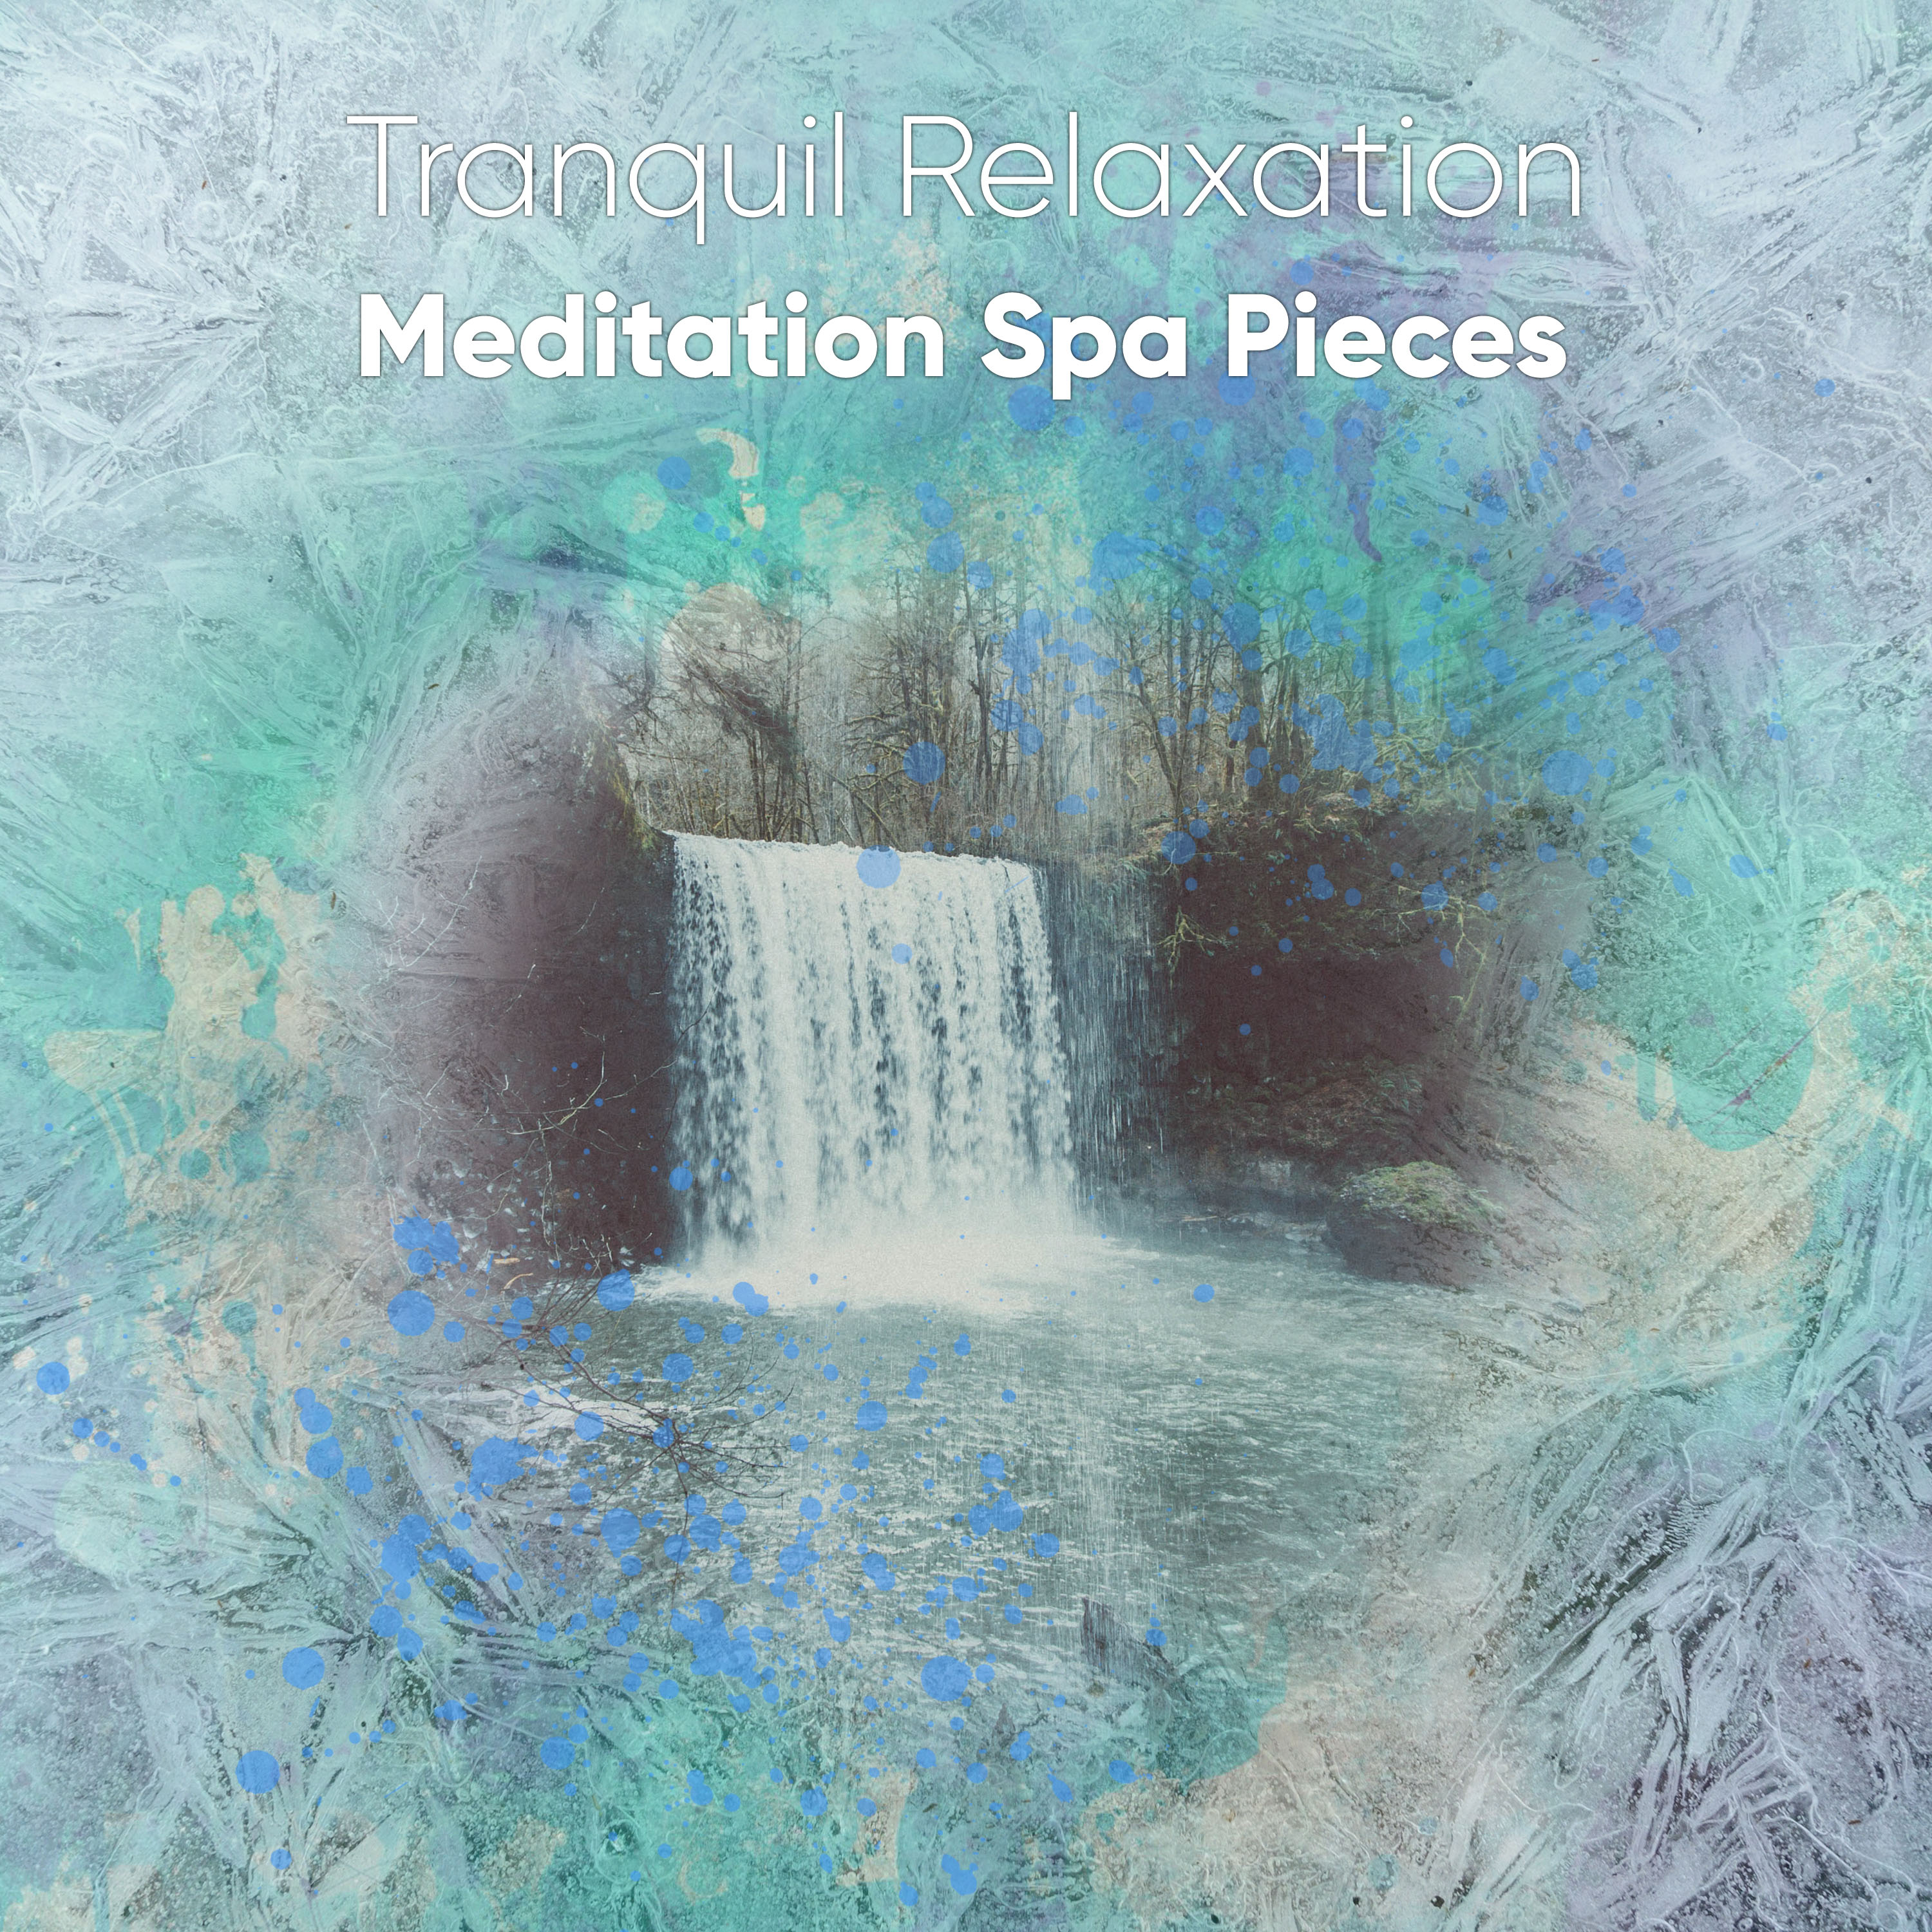 15 Tranquil Relaxation Meditation Spa Pieces